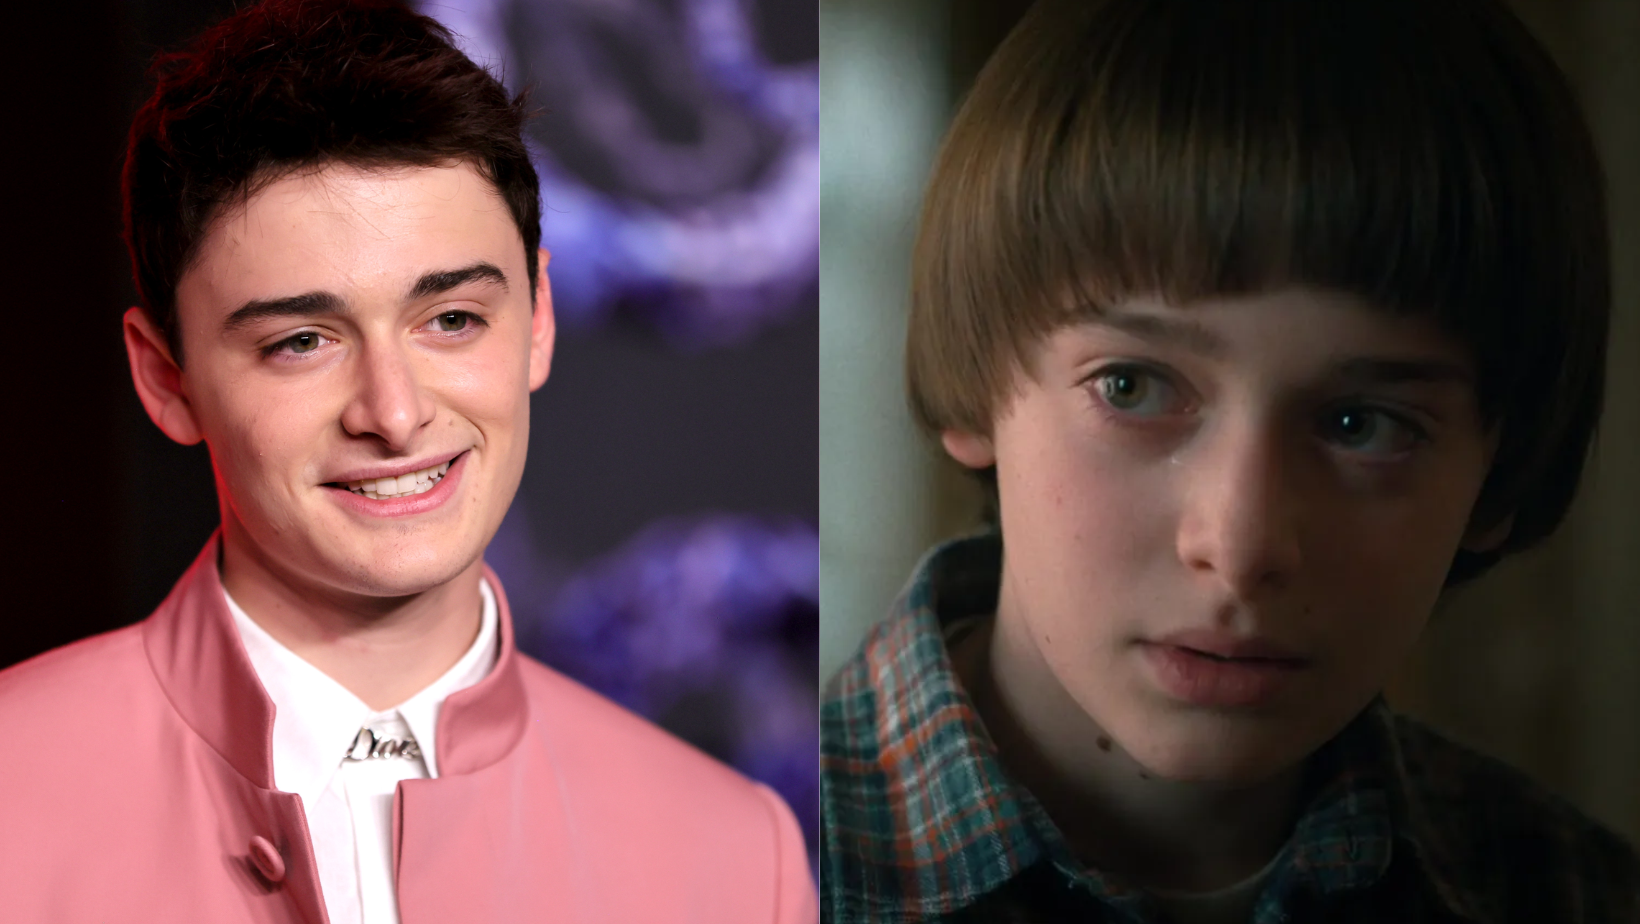 People’s Choice Awards: TV Star of the Year Noah Schnapp Drops Crazy ‘Stranger Things’ Season 5 Commercial During His Acceptance Speech

+2023